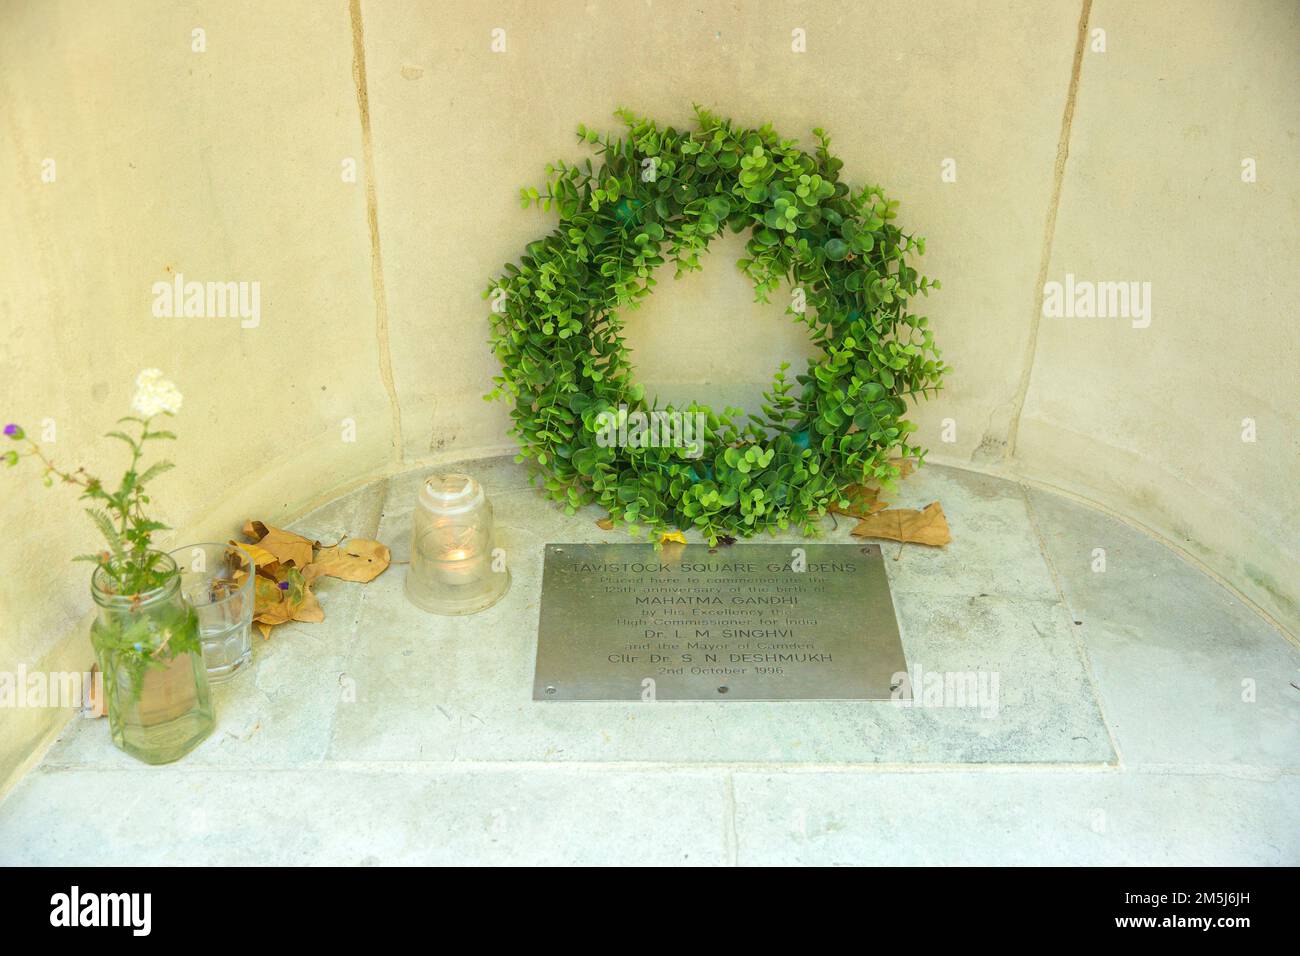 A plaque related to a Mahatma Gandhi statue is seen in Tavistock Square, central London. Stock Photo